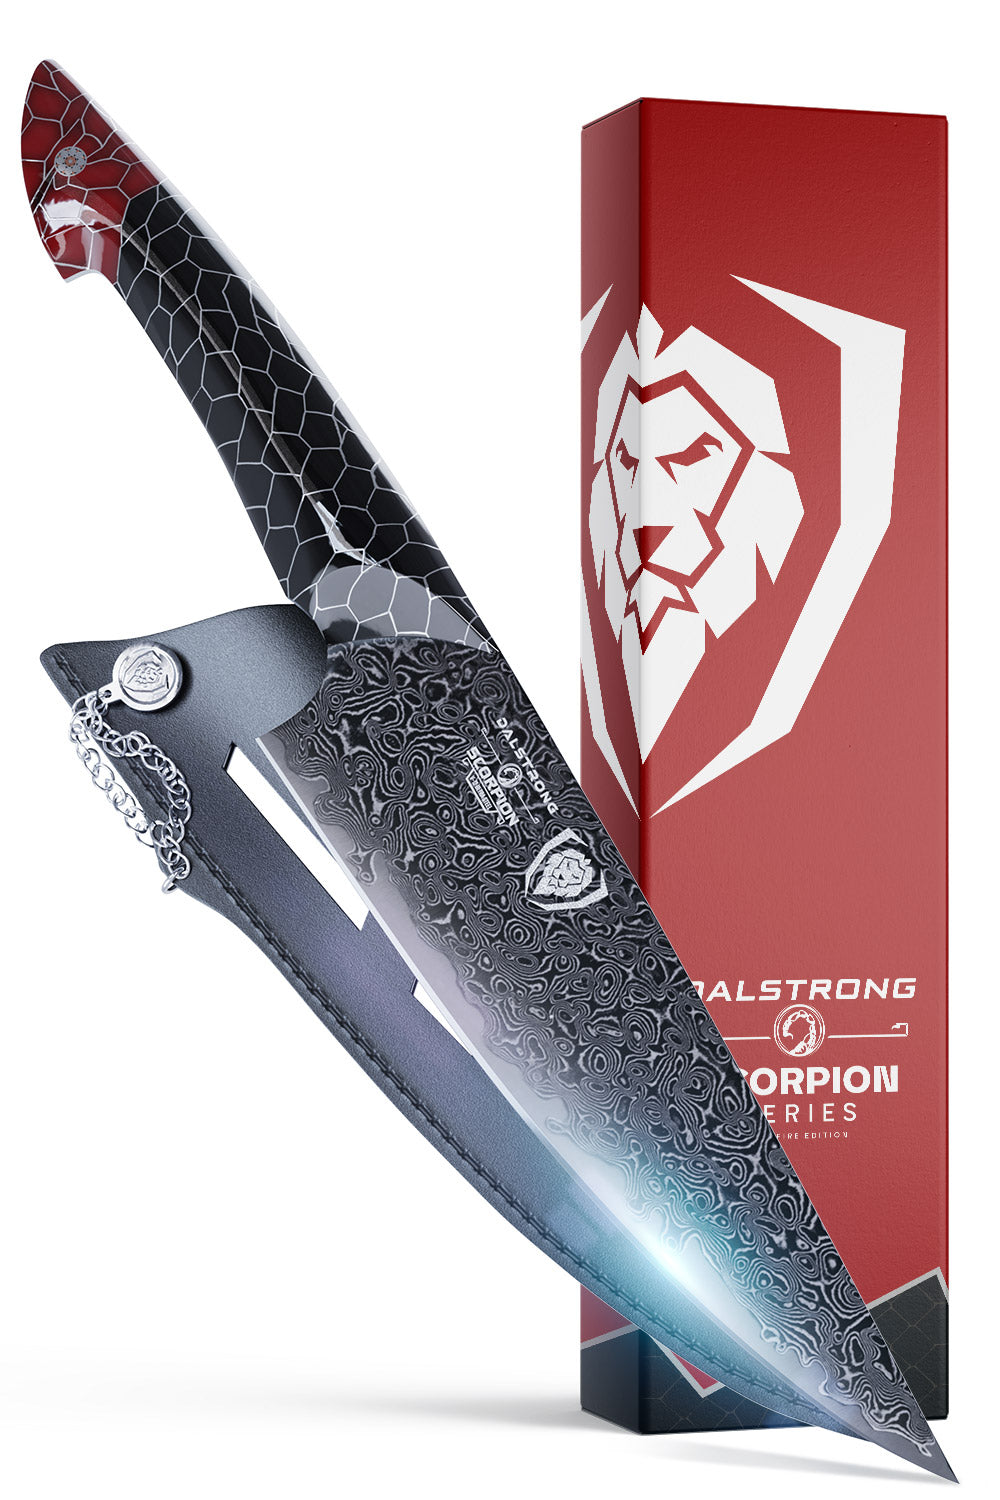 Dalstrong scorpion series 8 inch chef knife with red handle in front of it's premium packaging.